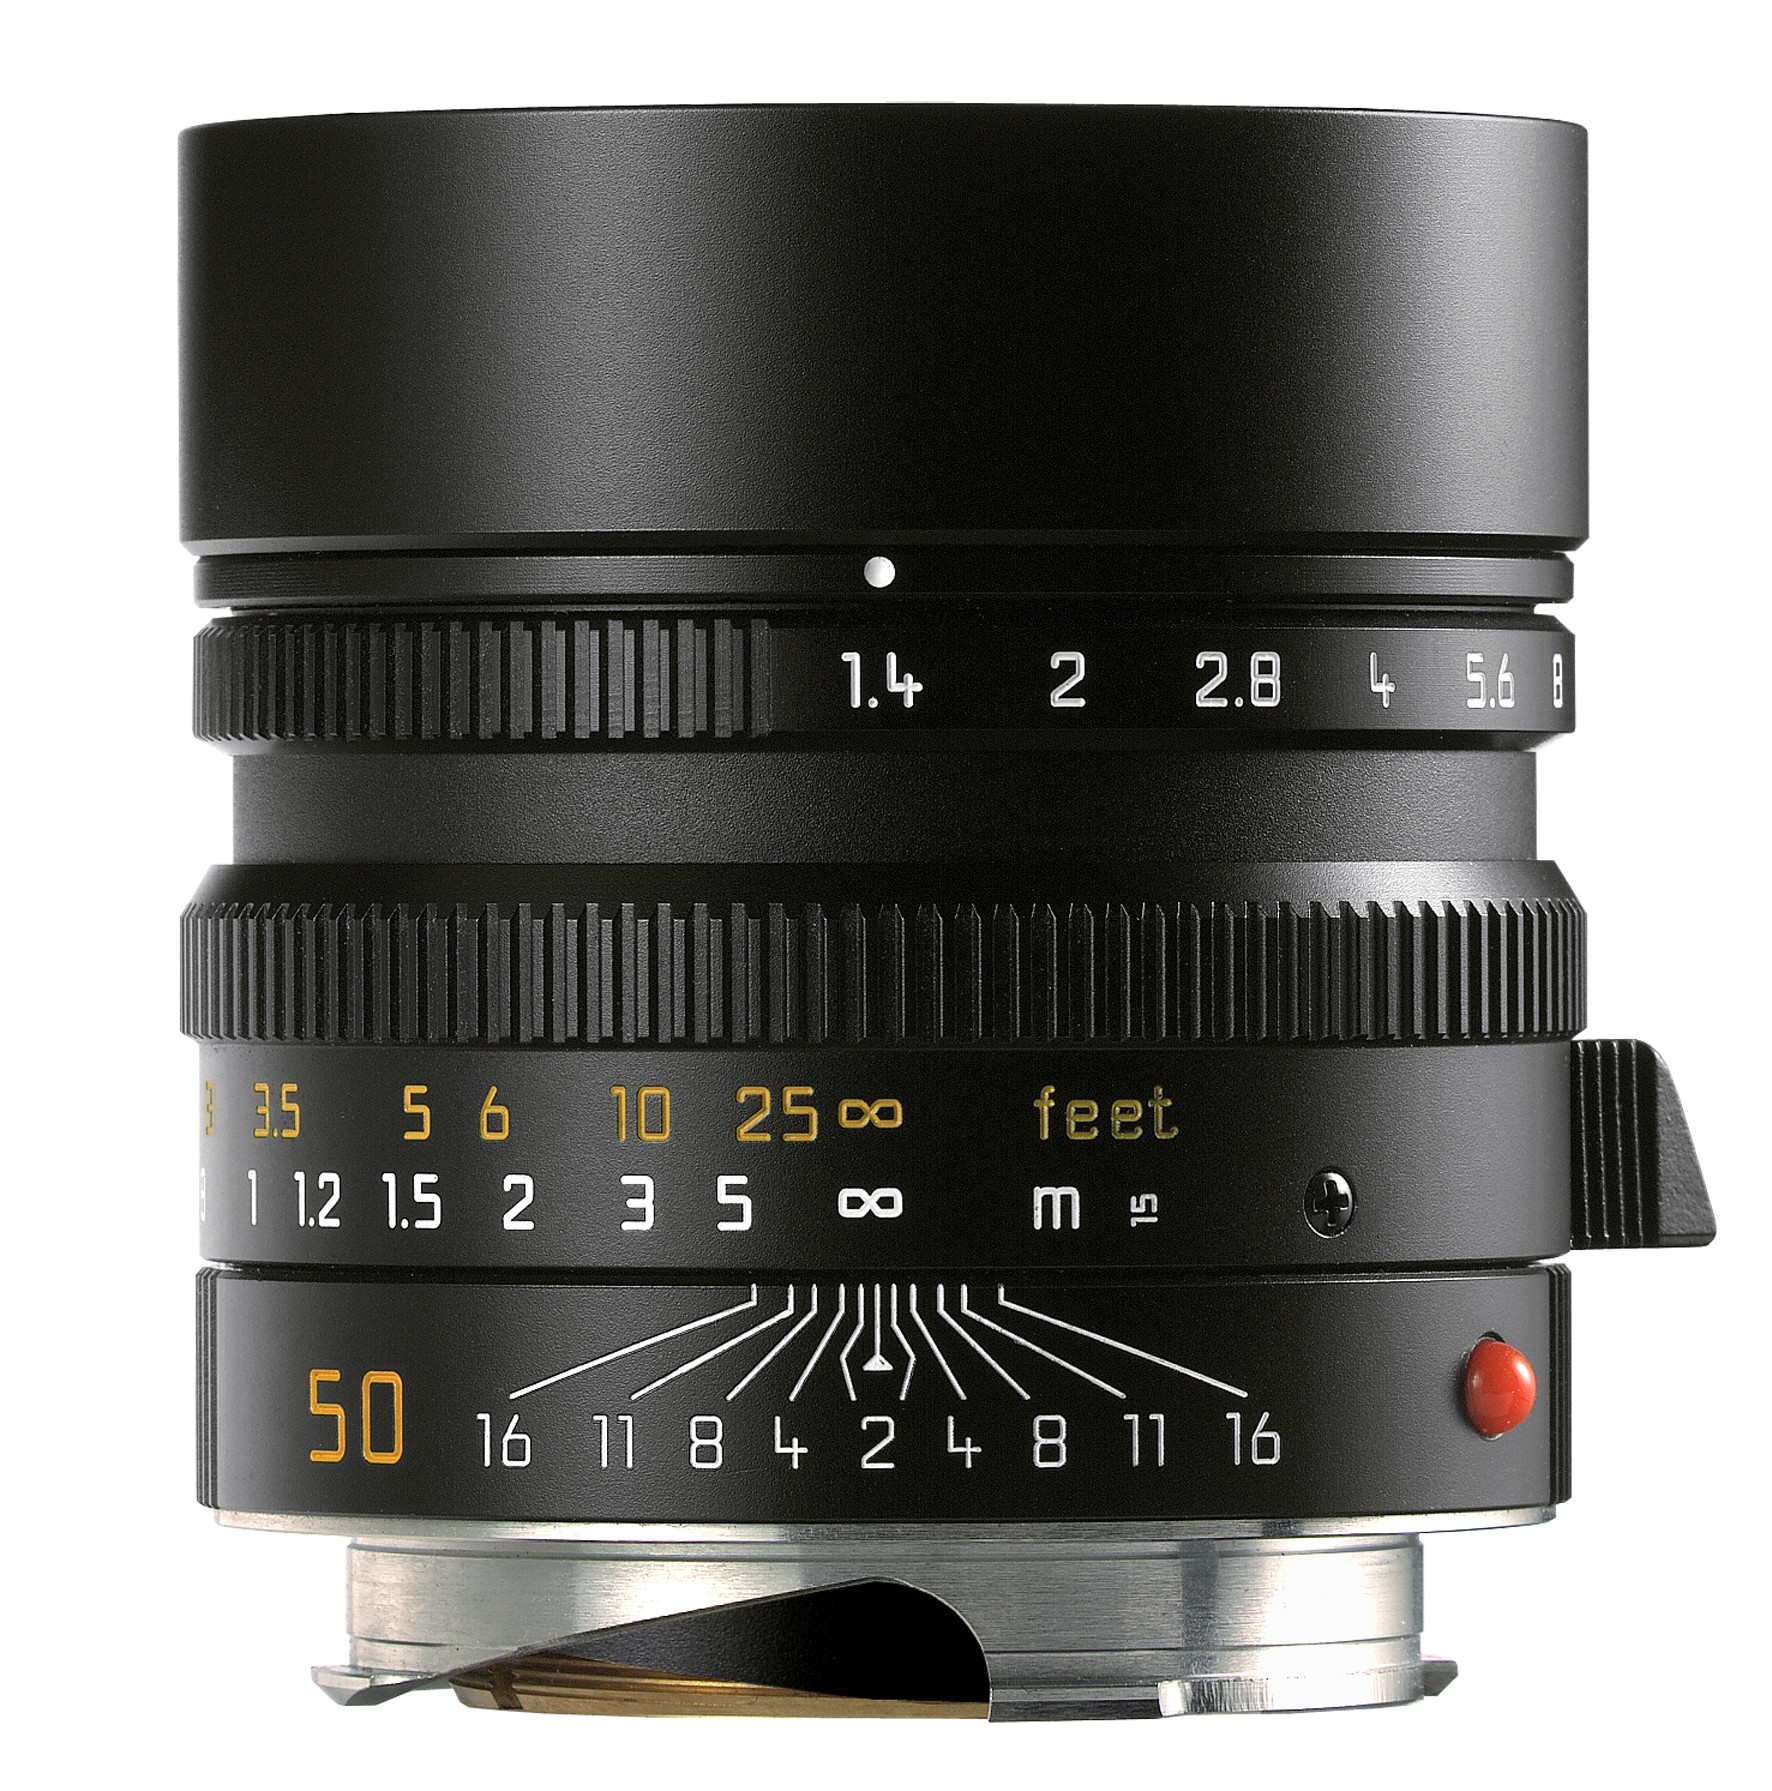 Leica Summilux M 50mm f/1.4 Lens Photography by Master Photographer Oz Yilmaz explains how to take better photographs with Leica Summilux M 50mm f/1.4 Lens